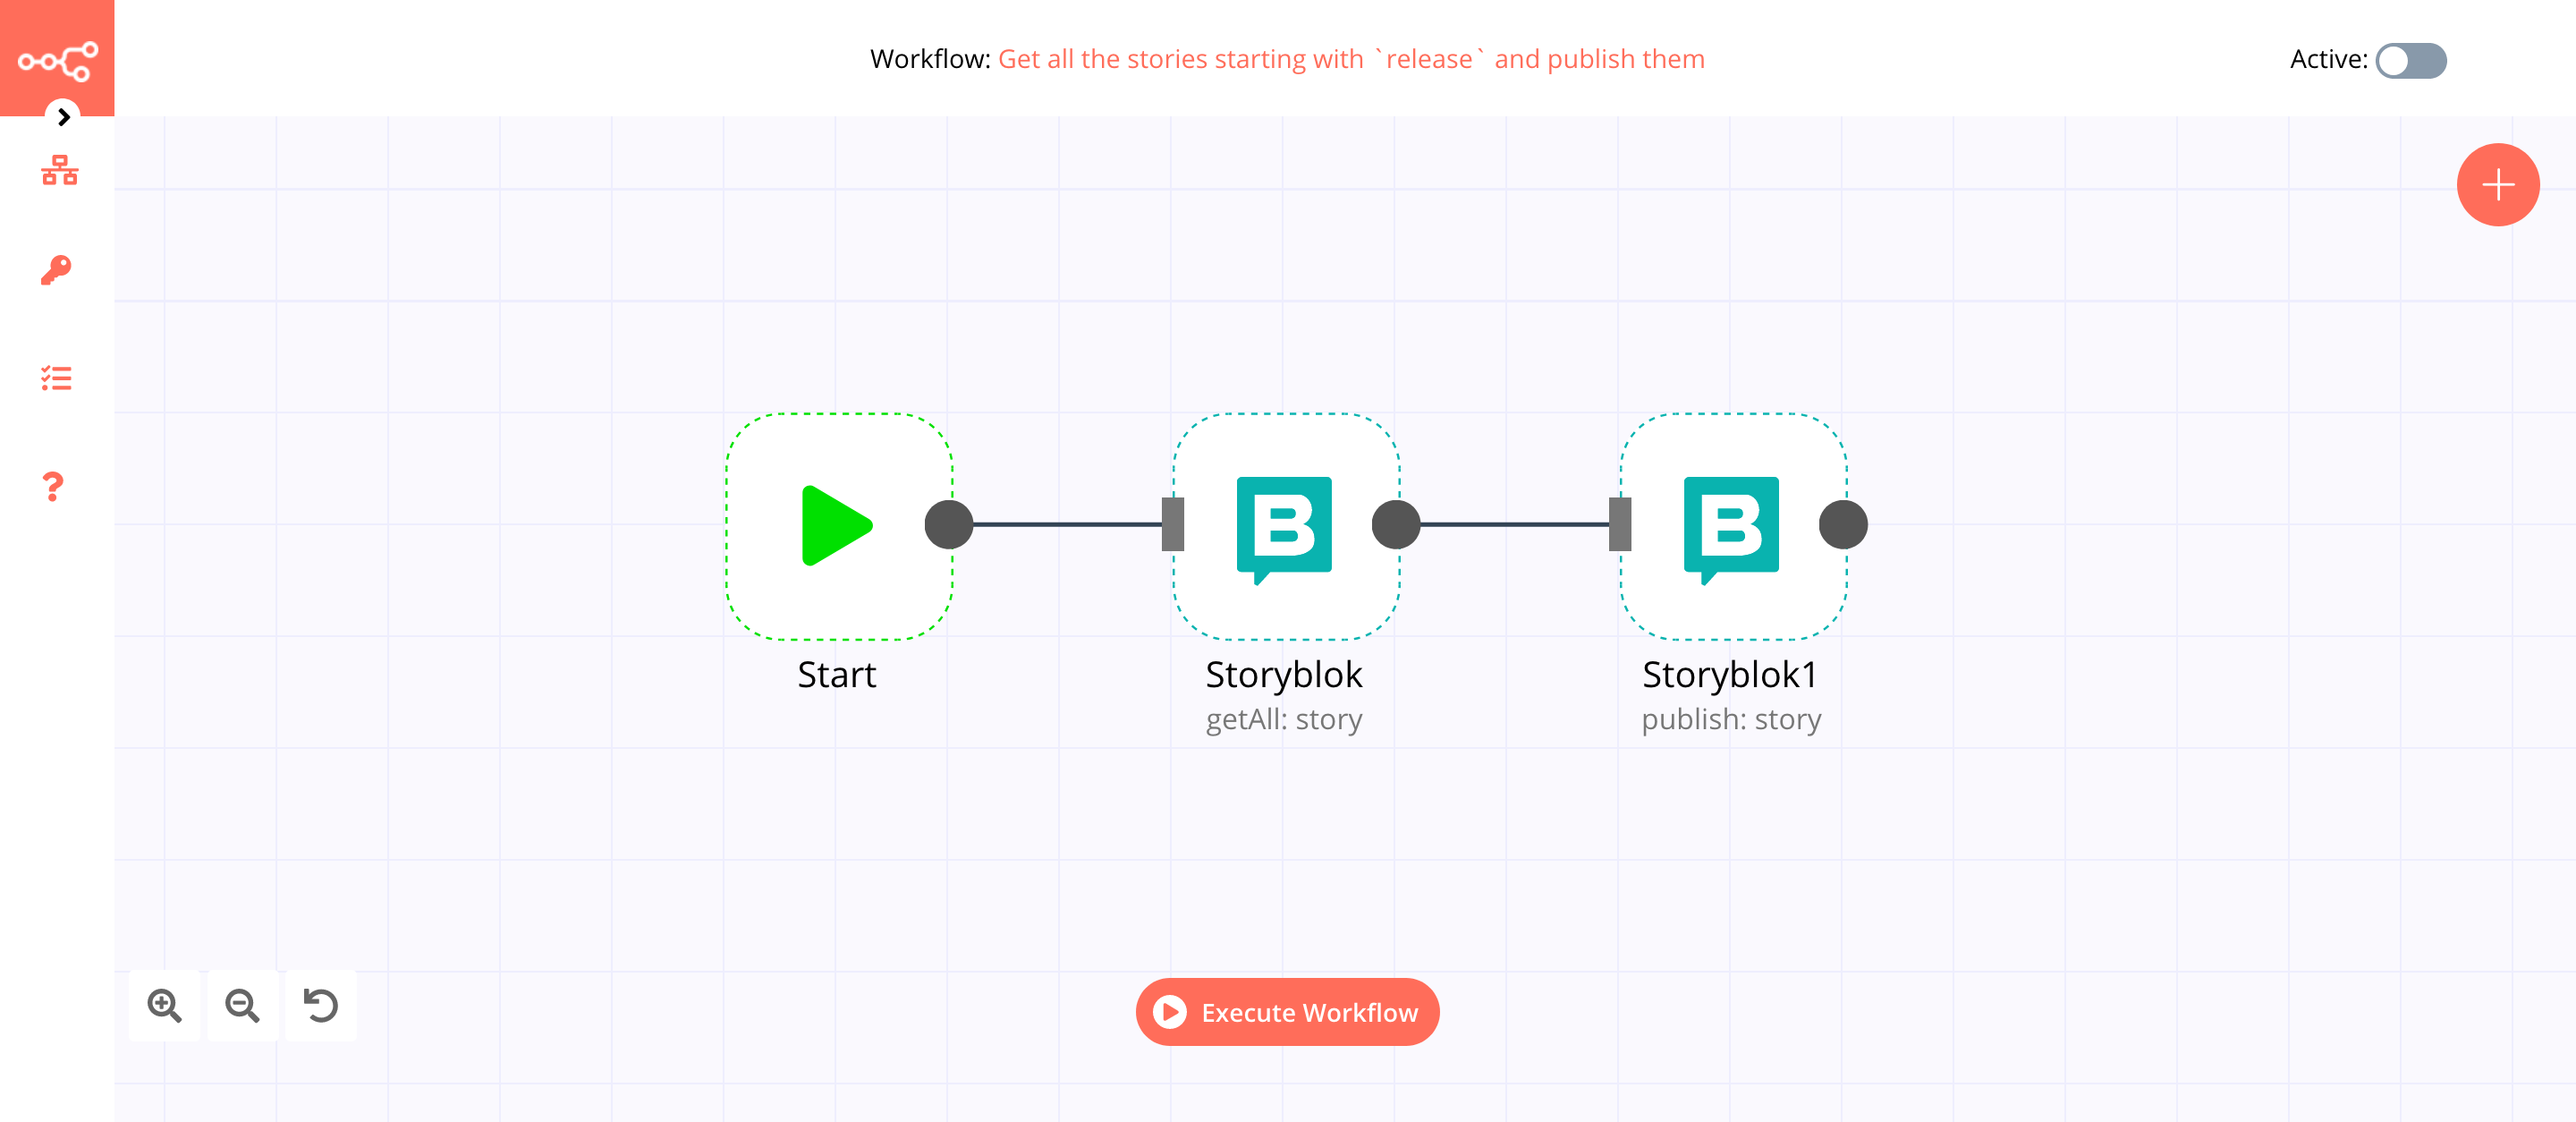 A workflow with the Storyblok node